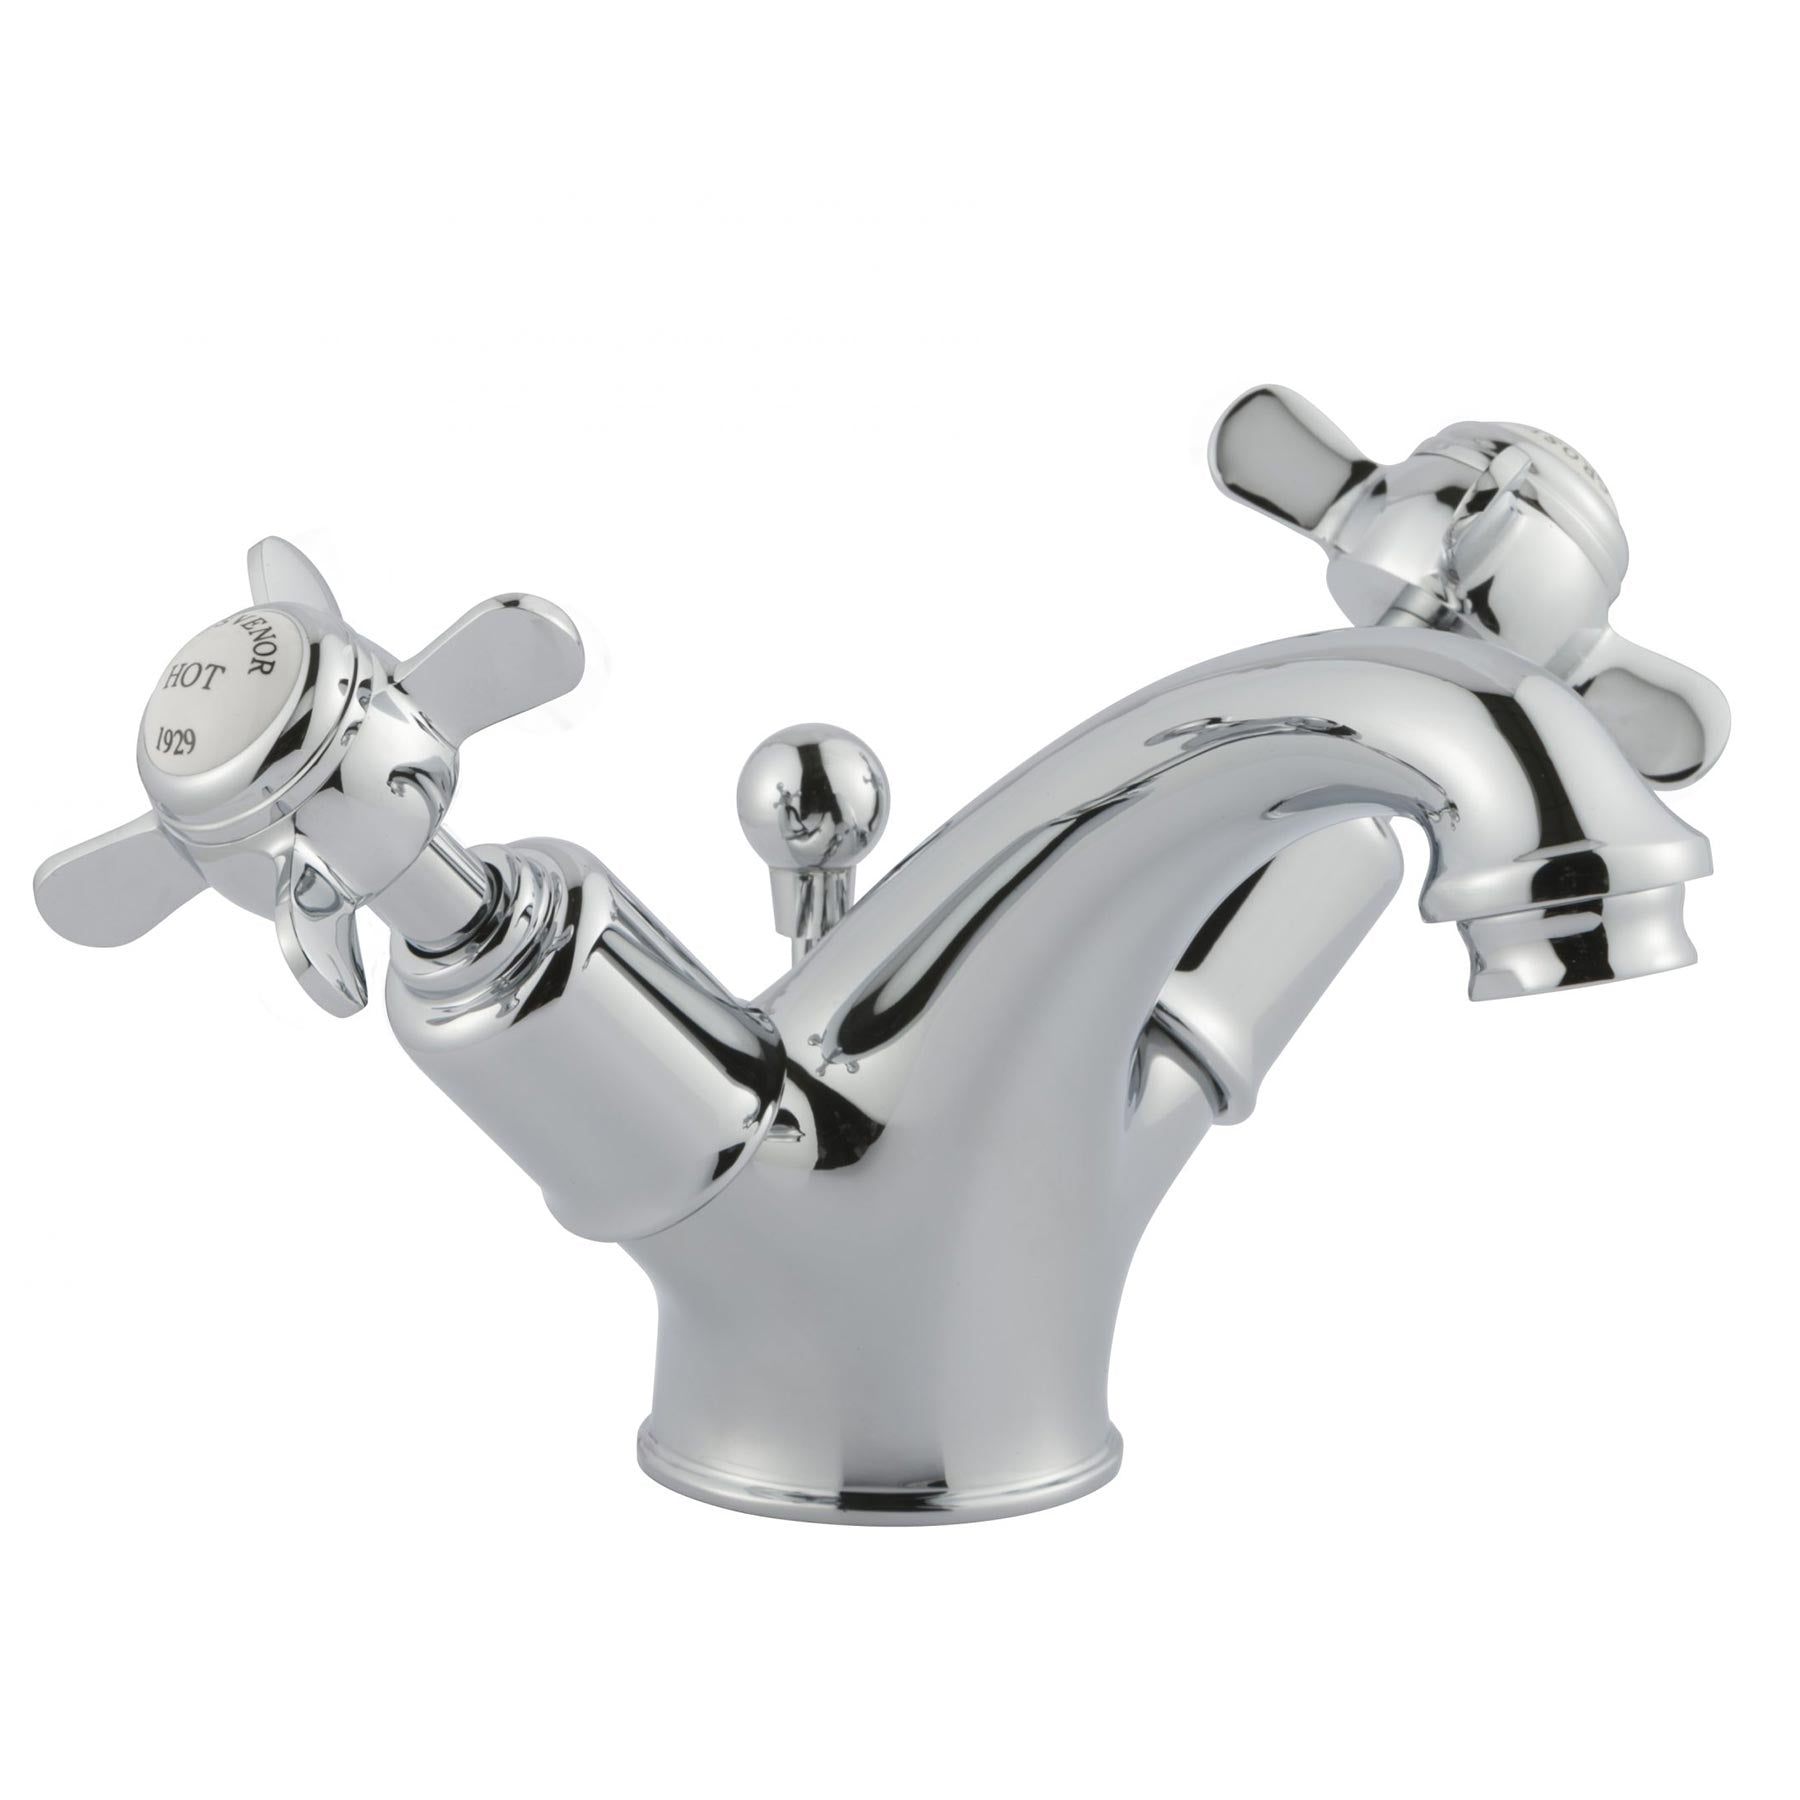 Chester Dual Pinch Handle Basin Mixer Tap with Pop-up Waste - Chrome